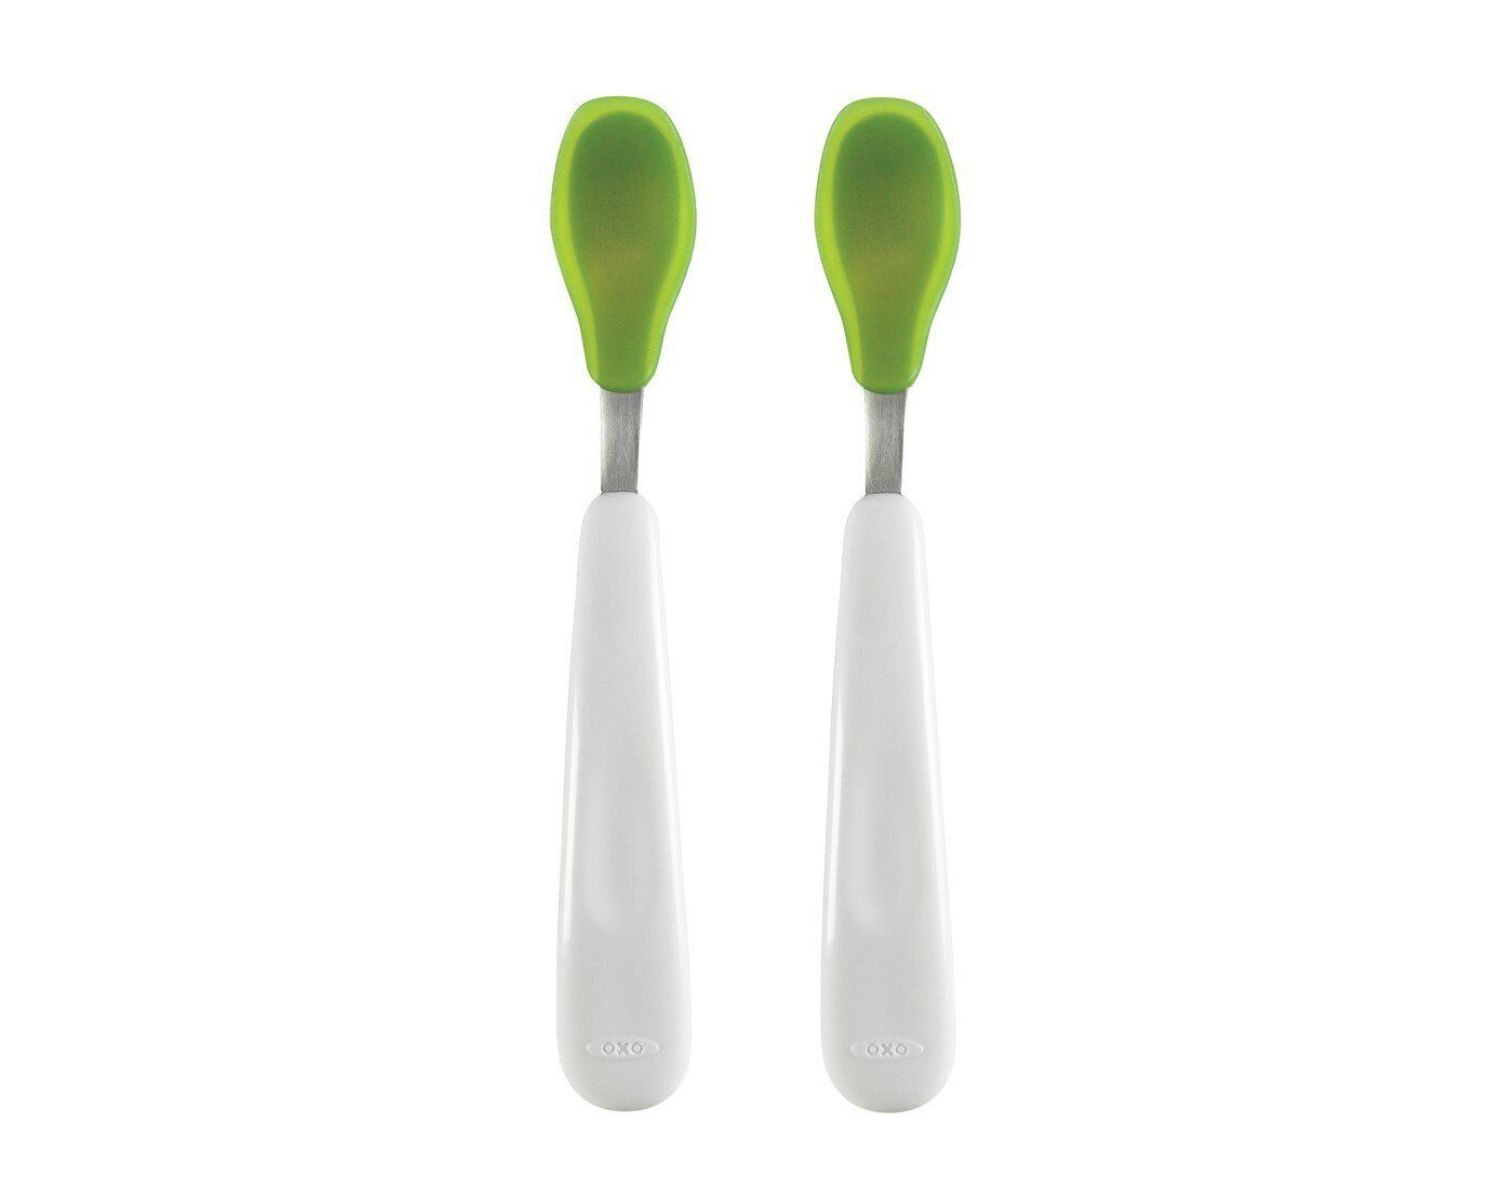 Review: Best Baby Feeding Spoon Set